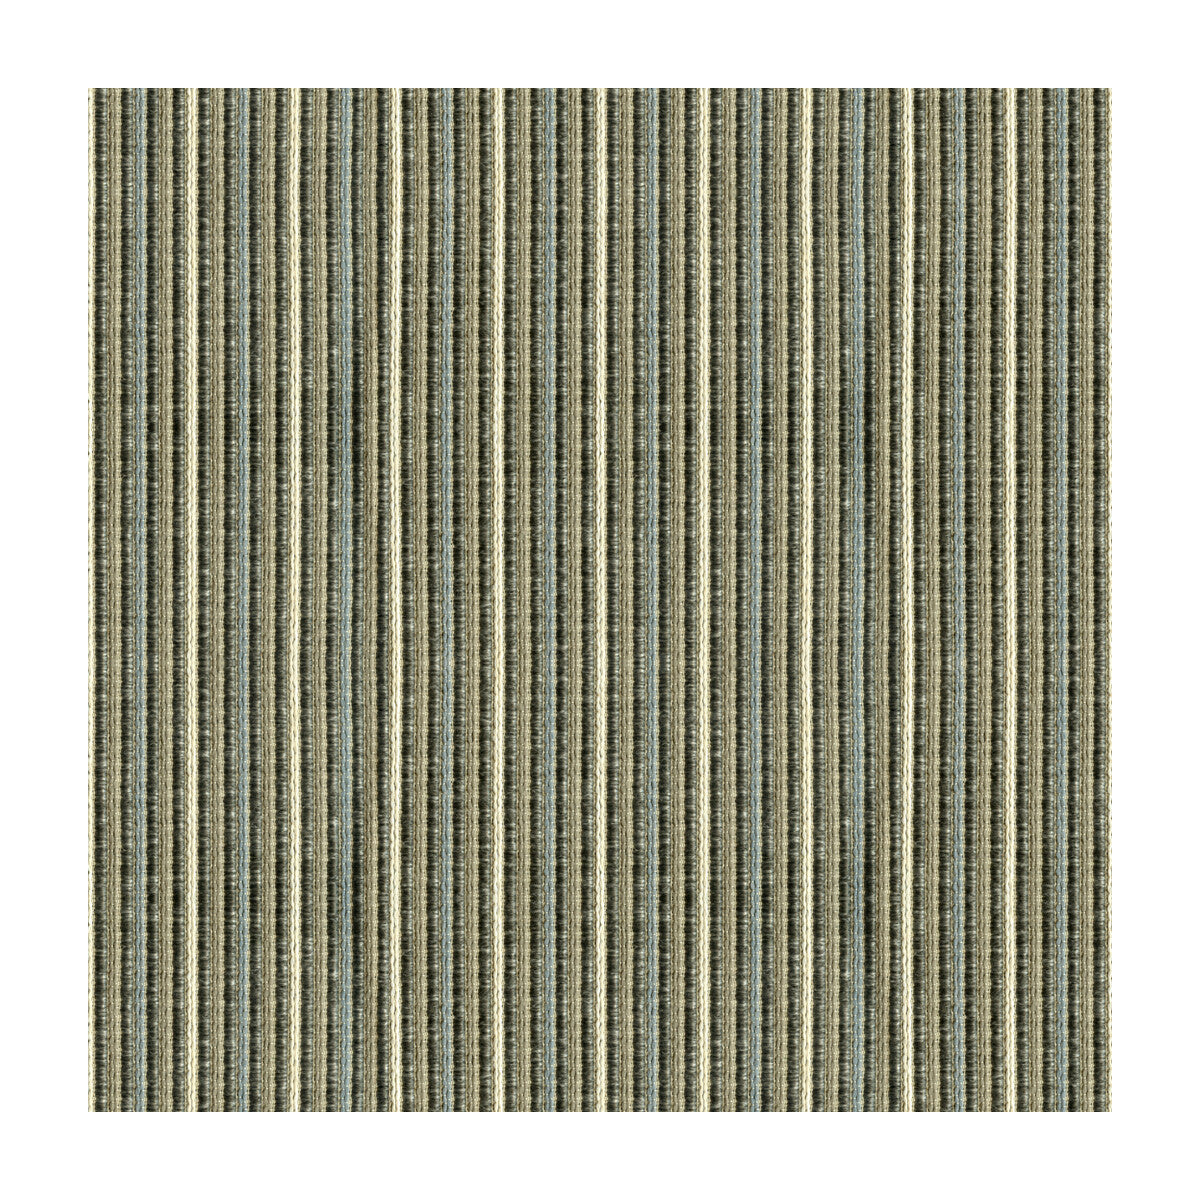 Inlet Stripe fabric in pearl gray color - pattern 33497.1511.0 - by Kravet Design in the Waterworks II collection